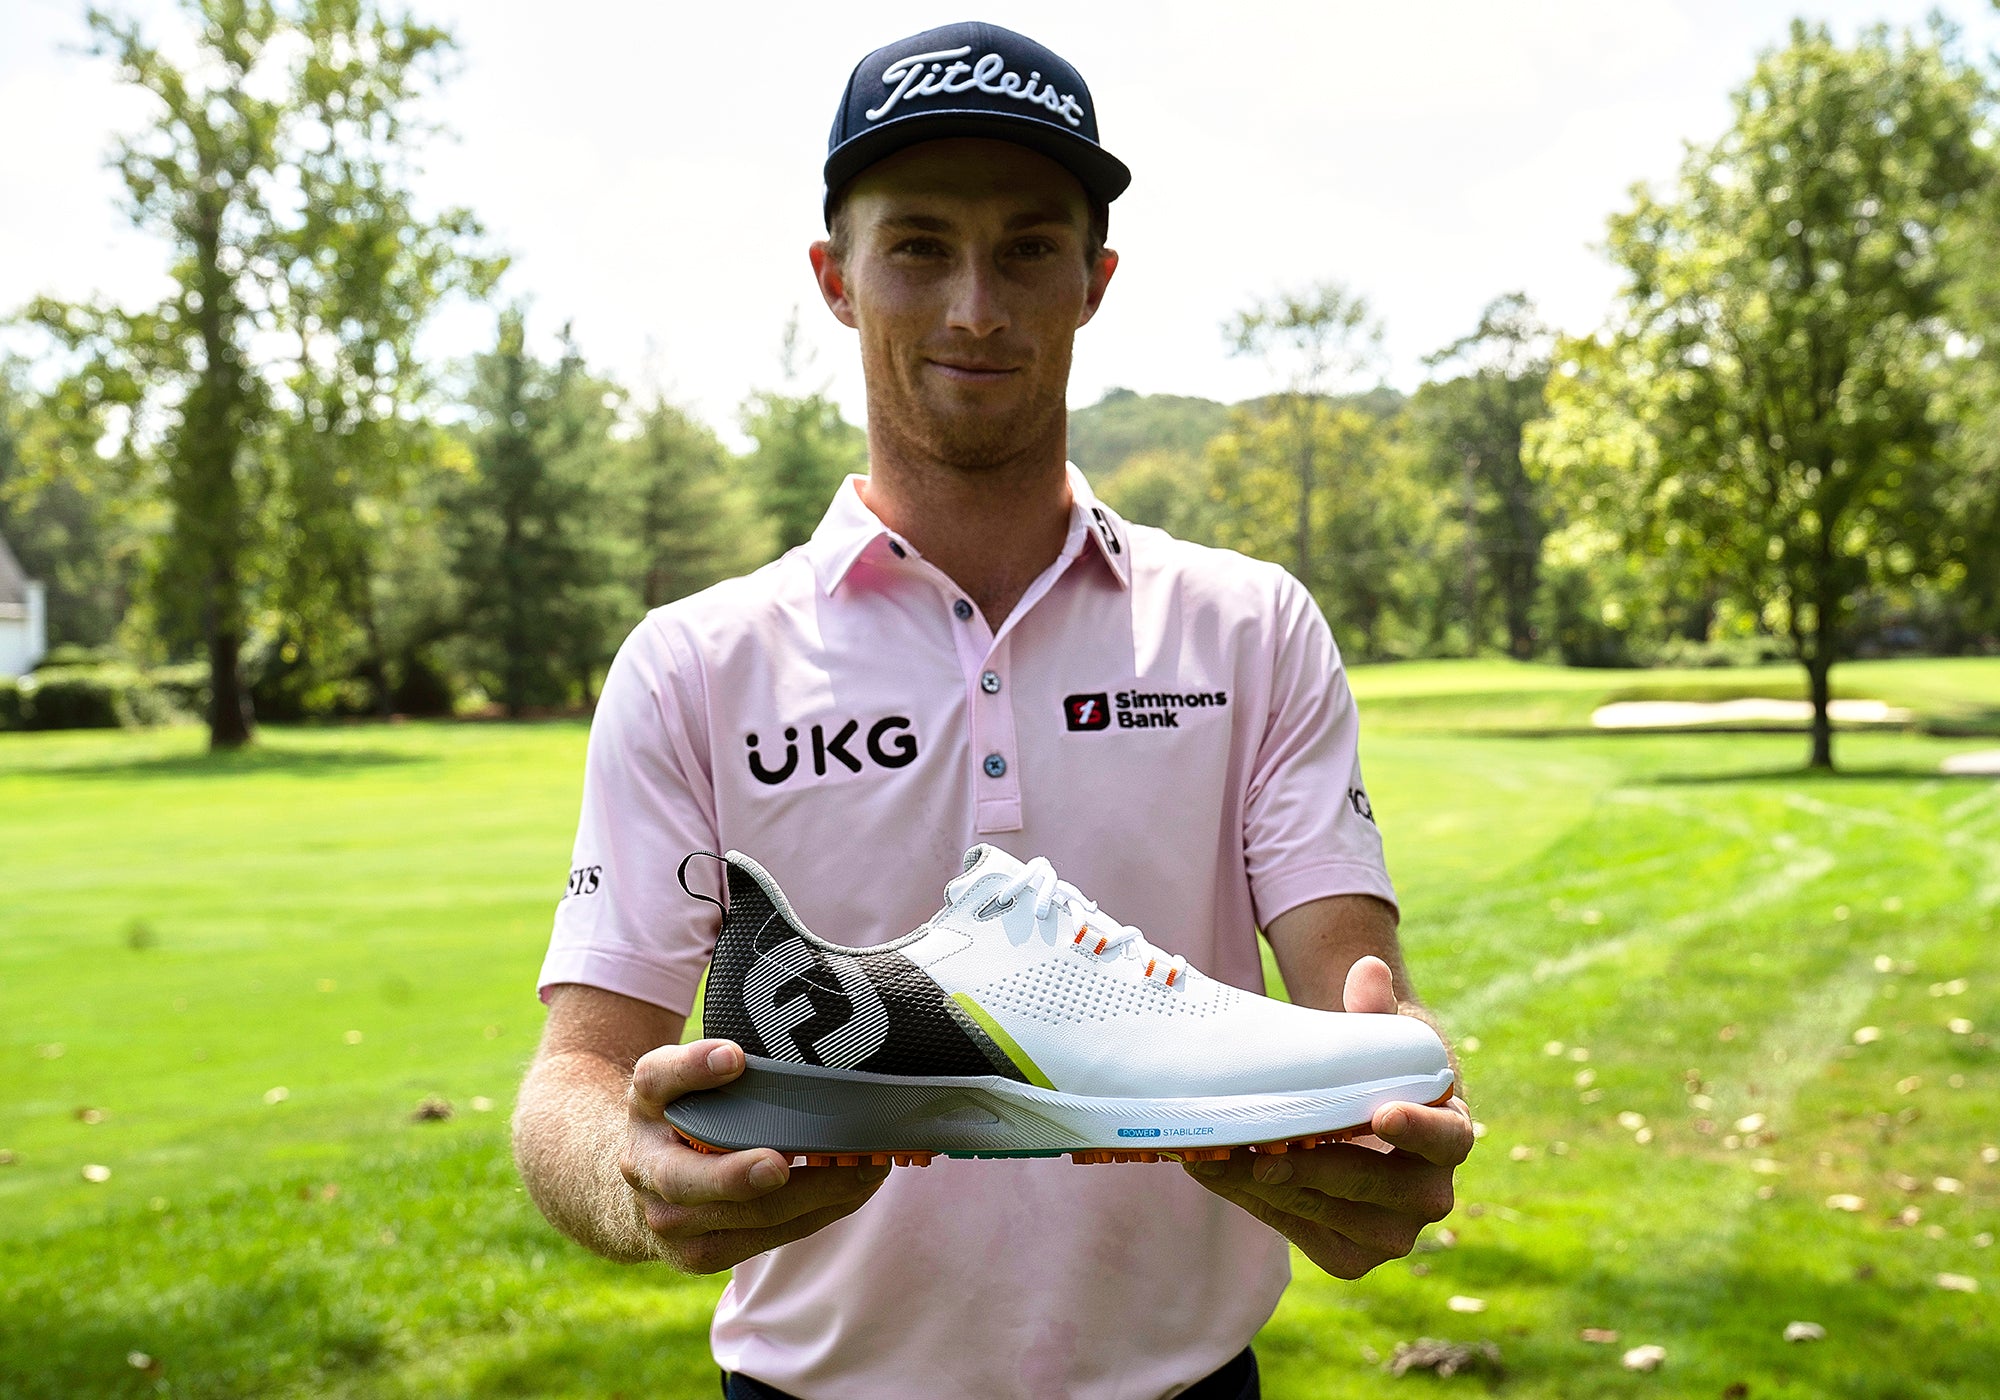 FootJoy Fuel golf shoes bring the heat to athletic footwear